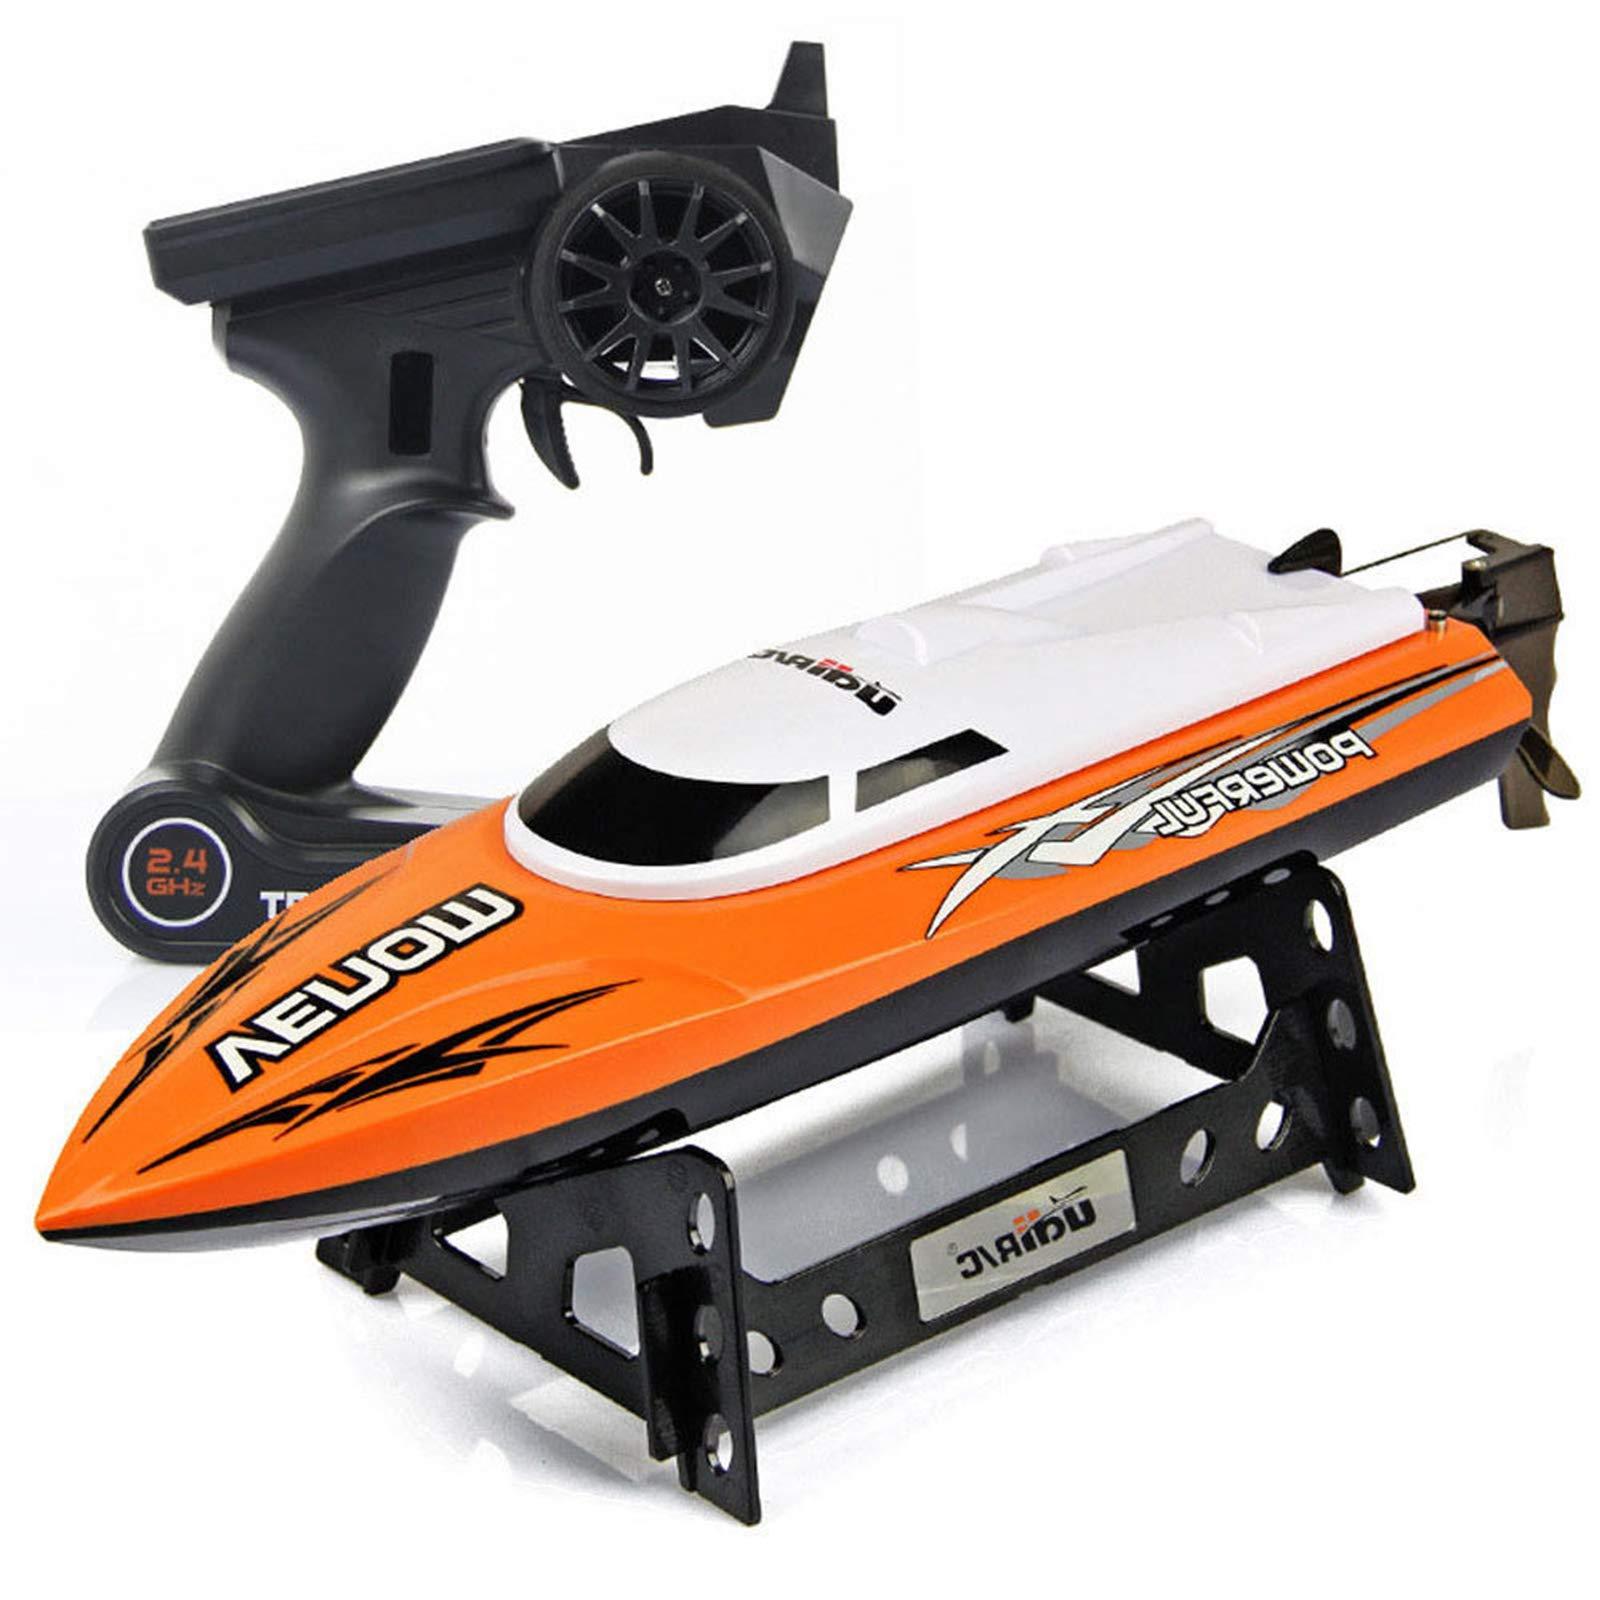 Monster Rc Boat: Popular models and their key features.